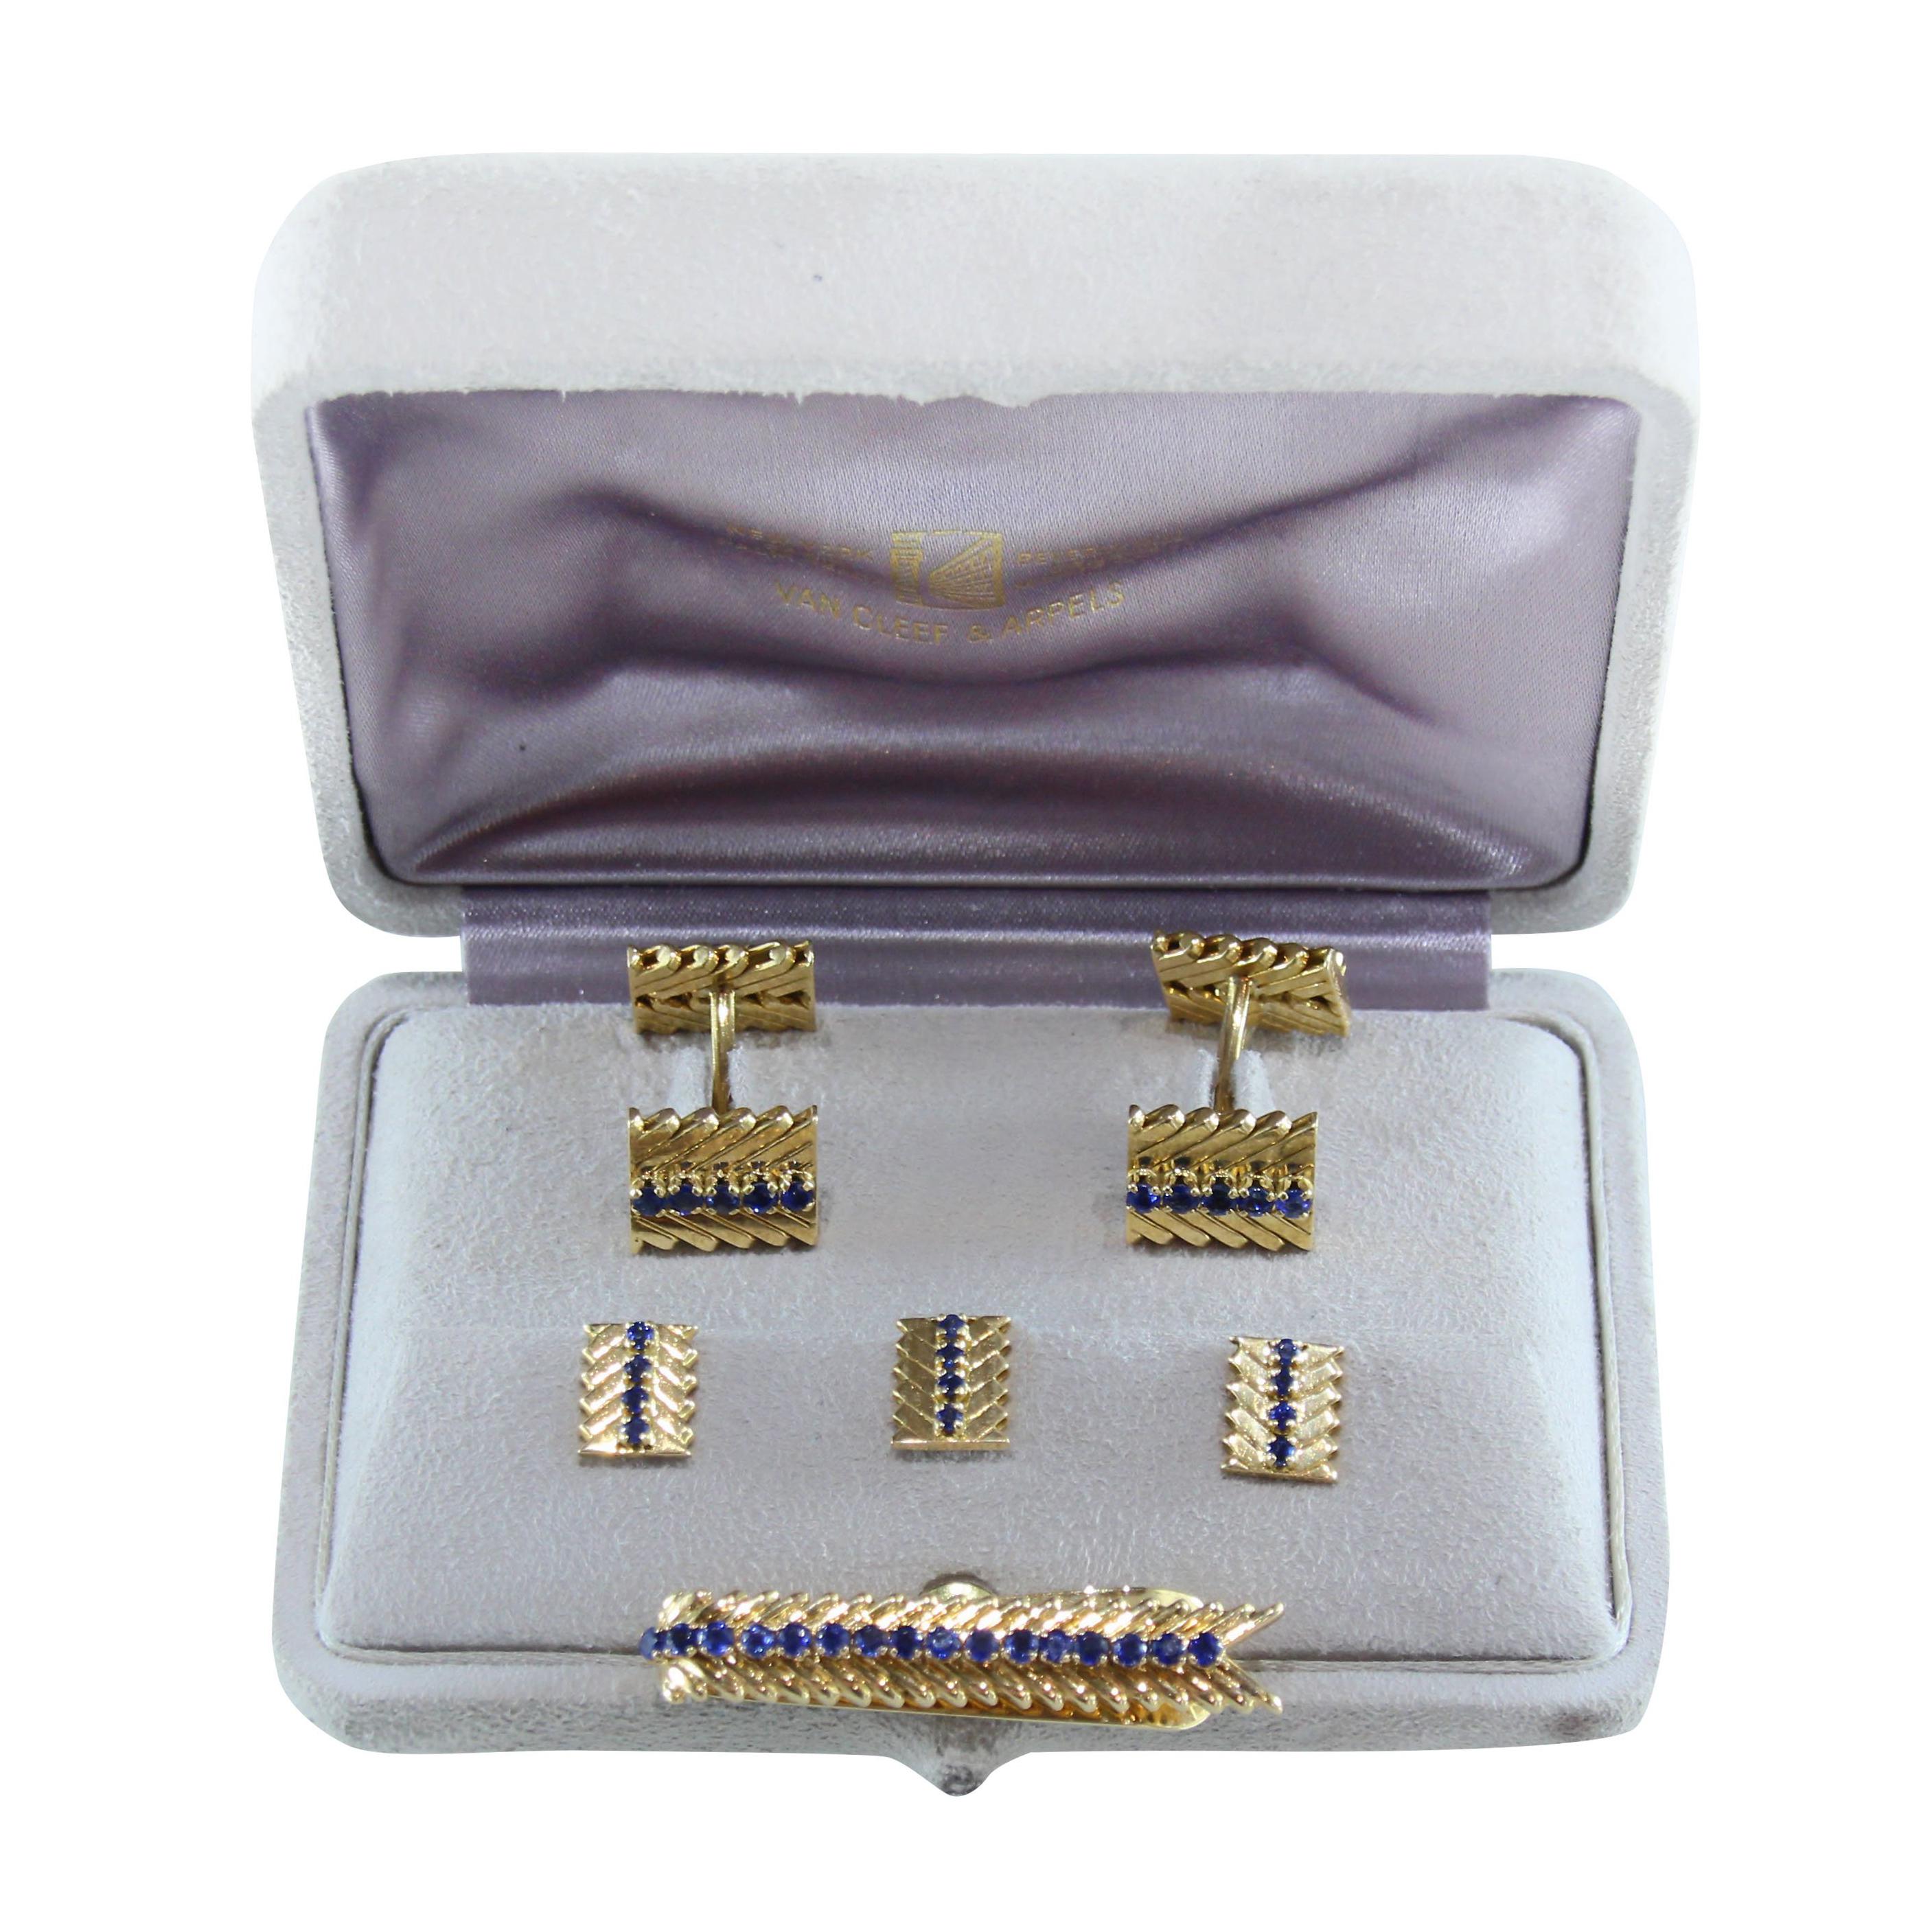 Van Cleef & Arpels dress set consisting of a pair of cufflinks and  3 studs . The cufflinks and stud set come with the original Van Cleef & Arpels suede box. Chevron pattern set with round sapphires. Made in France.